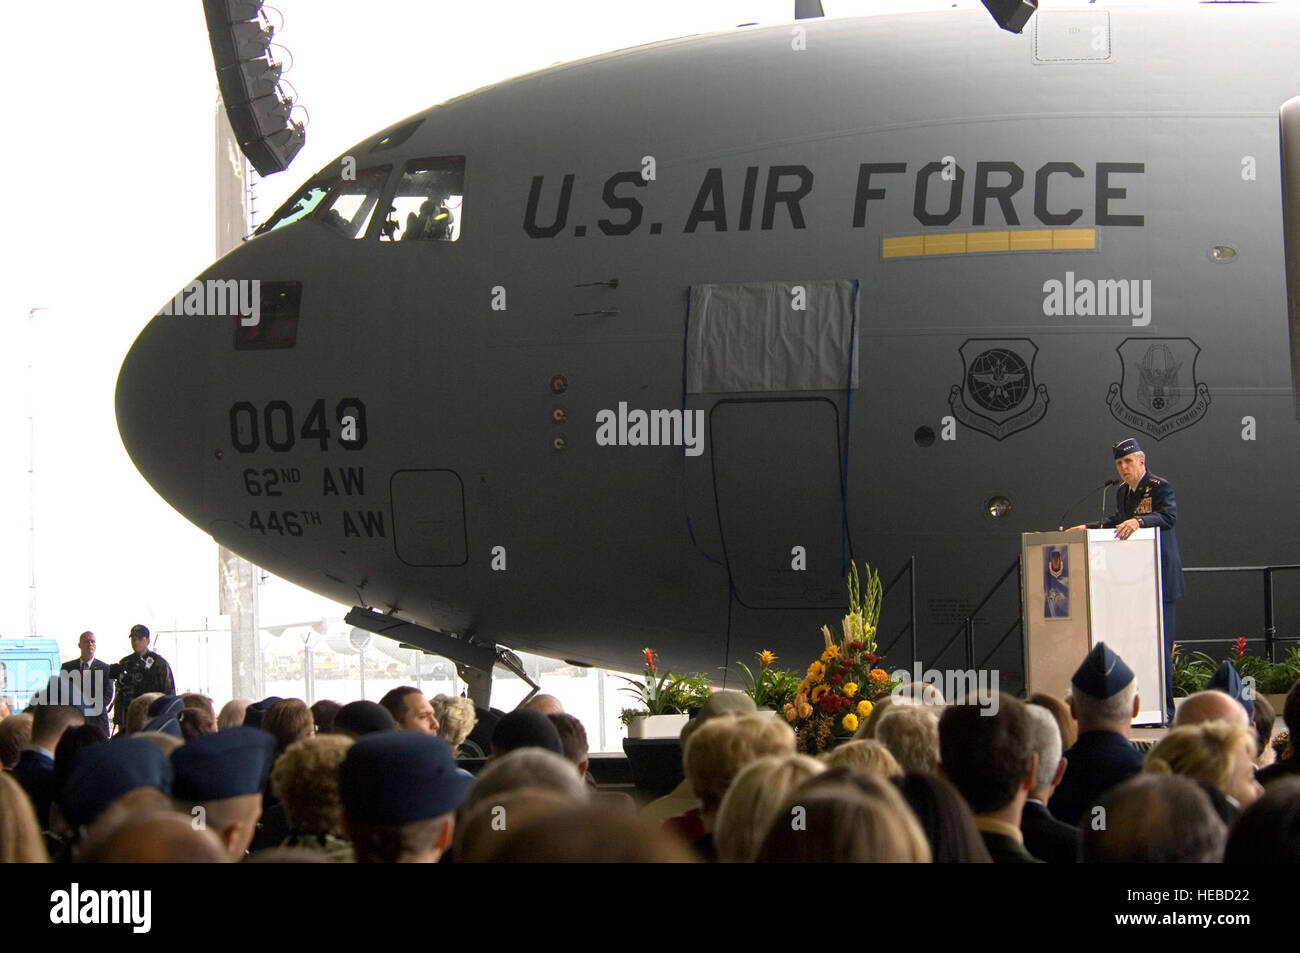 RHEIN-MAIN AIR BASE, Germany -- Gen. Robert H. 'Doc' Foglesong, U.S. Air Forces in Europe commander, speaks at the ceremonial closing of this longtime airlift base.  The ceremony was Oct. 10 and closed the Air Force's 'Gateway to Europe' after 60 years of service. The Air Force will turn the base over to the Frankfurt Airport Authority in December. (U.S. Air Force photo by Master Sgt. John E. Lasky) Stock Photo